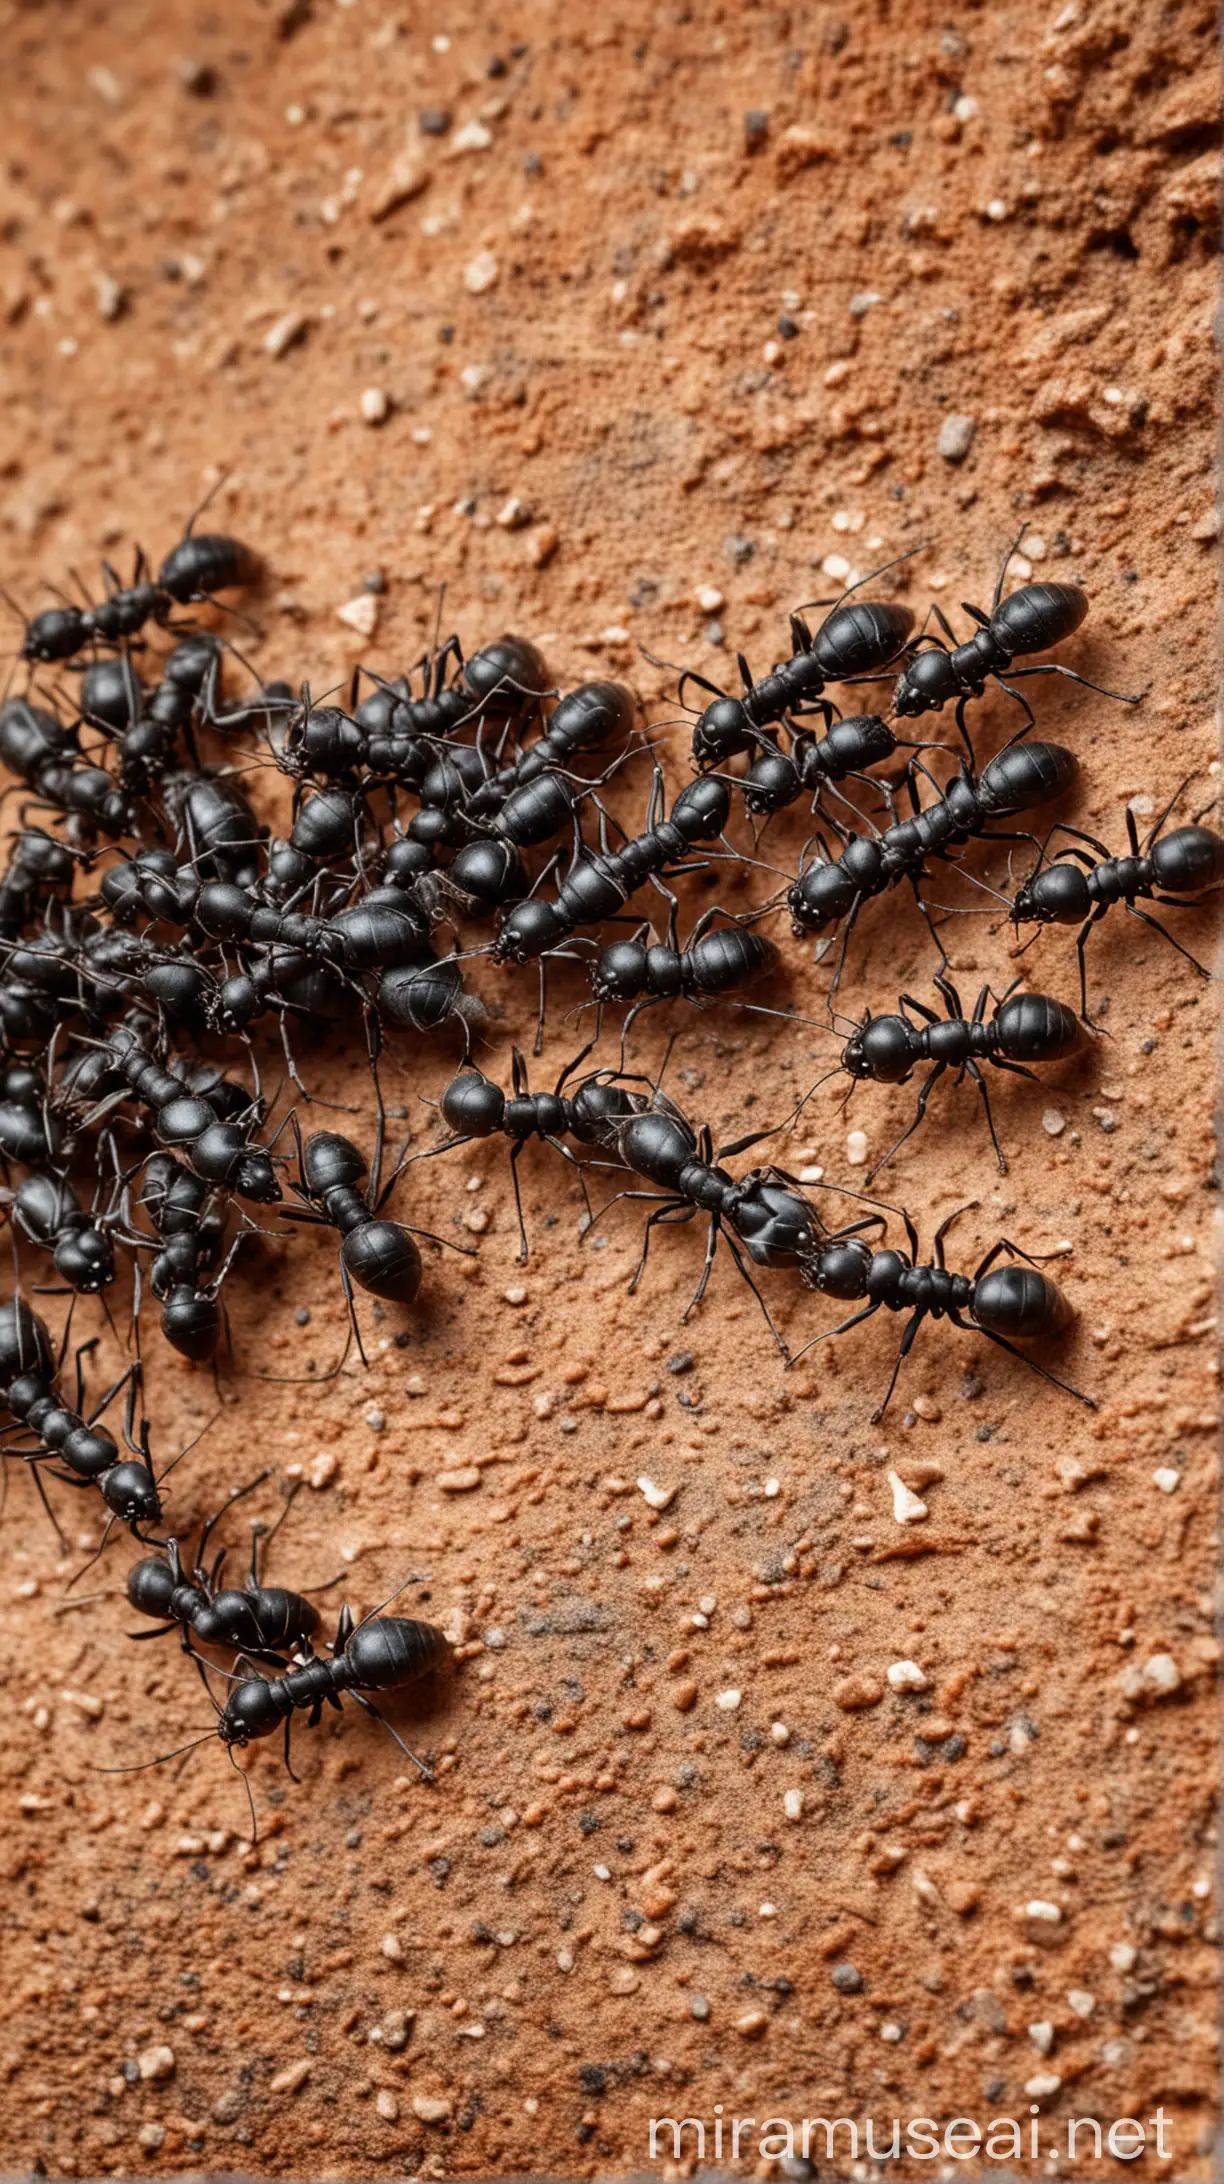 Many black ant in ancient world